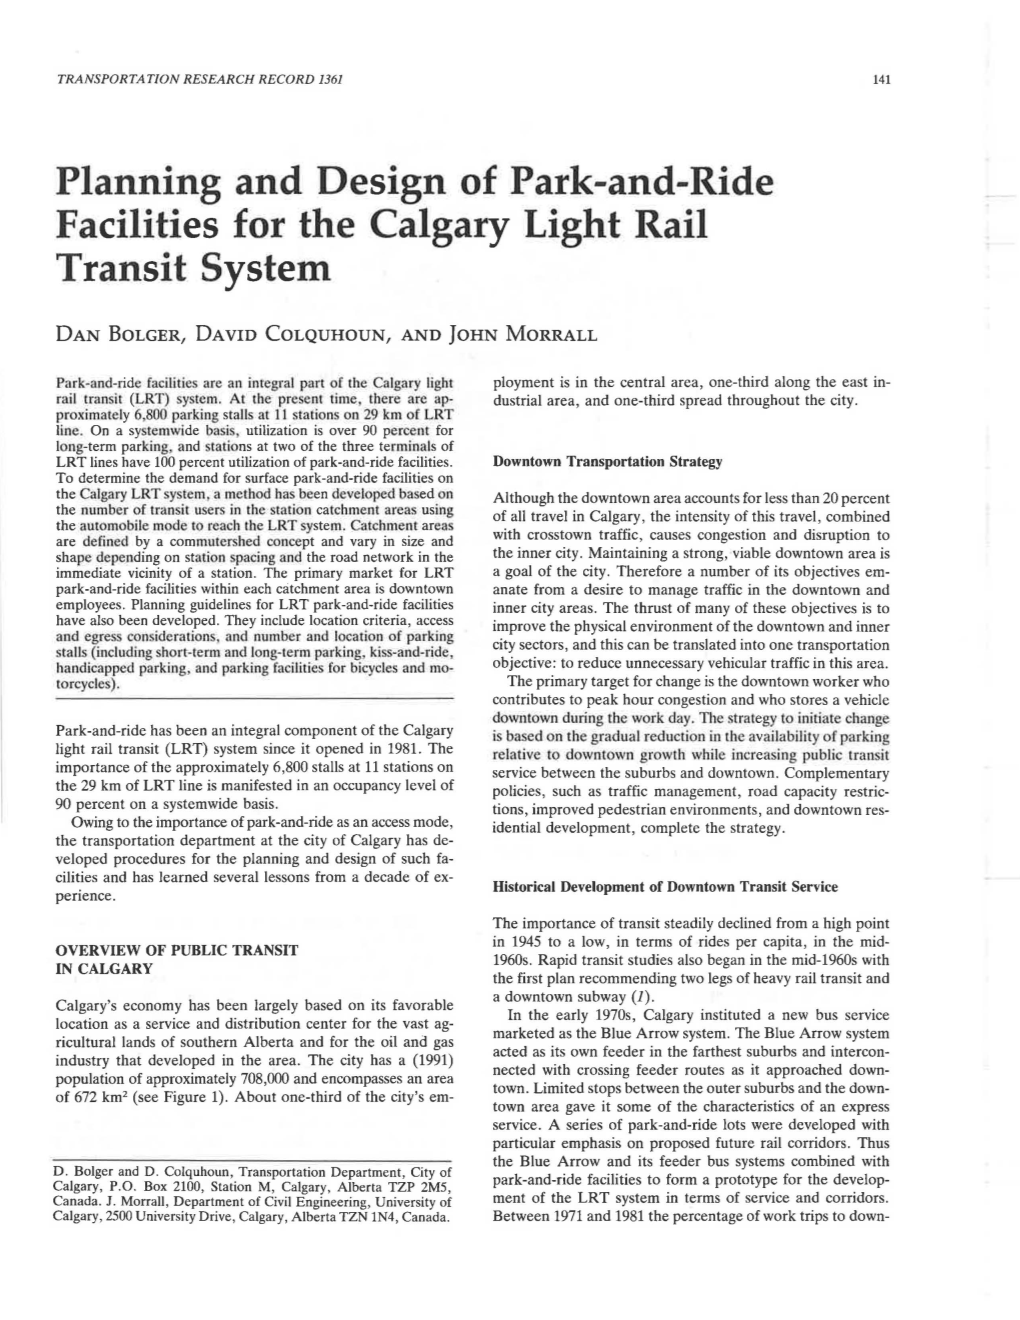 Planning and Design of Park-And-Ride Facilities for the Calgary Light Rail Transit System